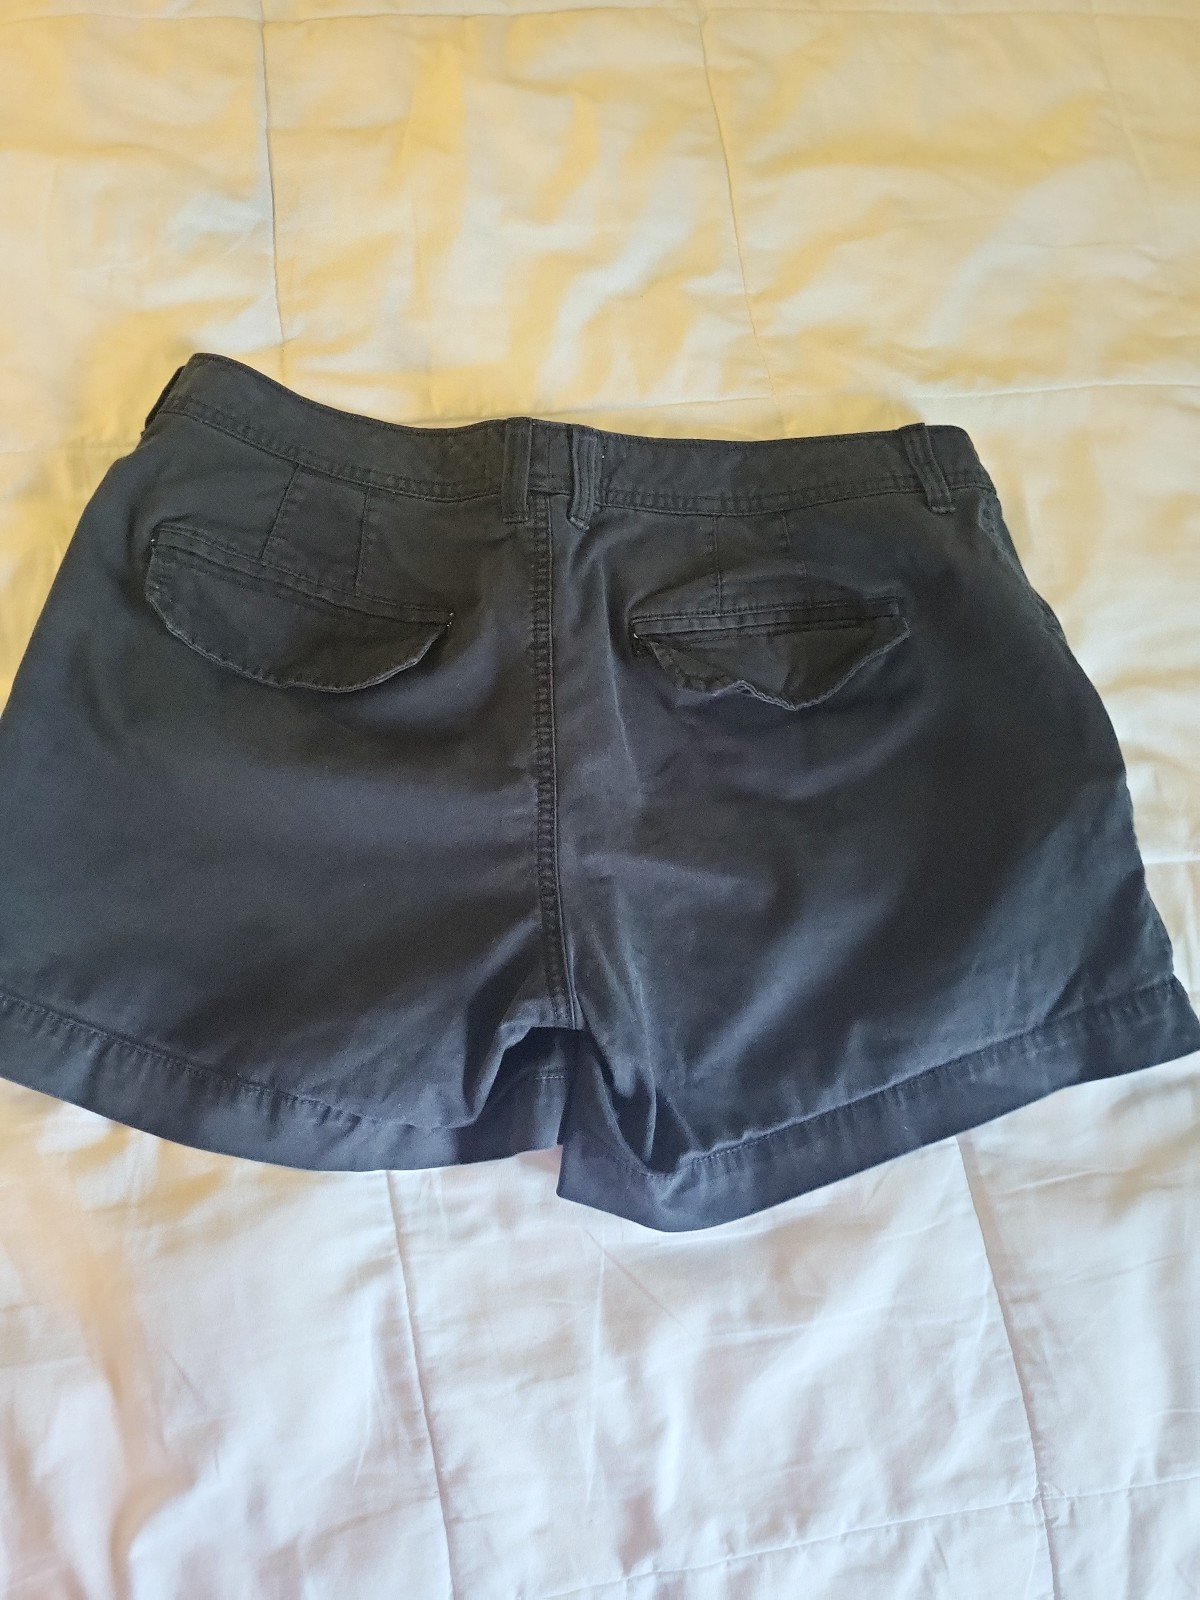 Personality Old Navy Shorts H8Dlmu2Er Low Price